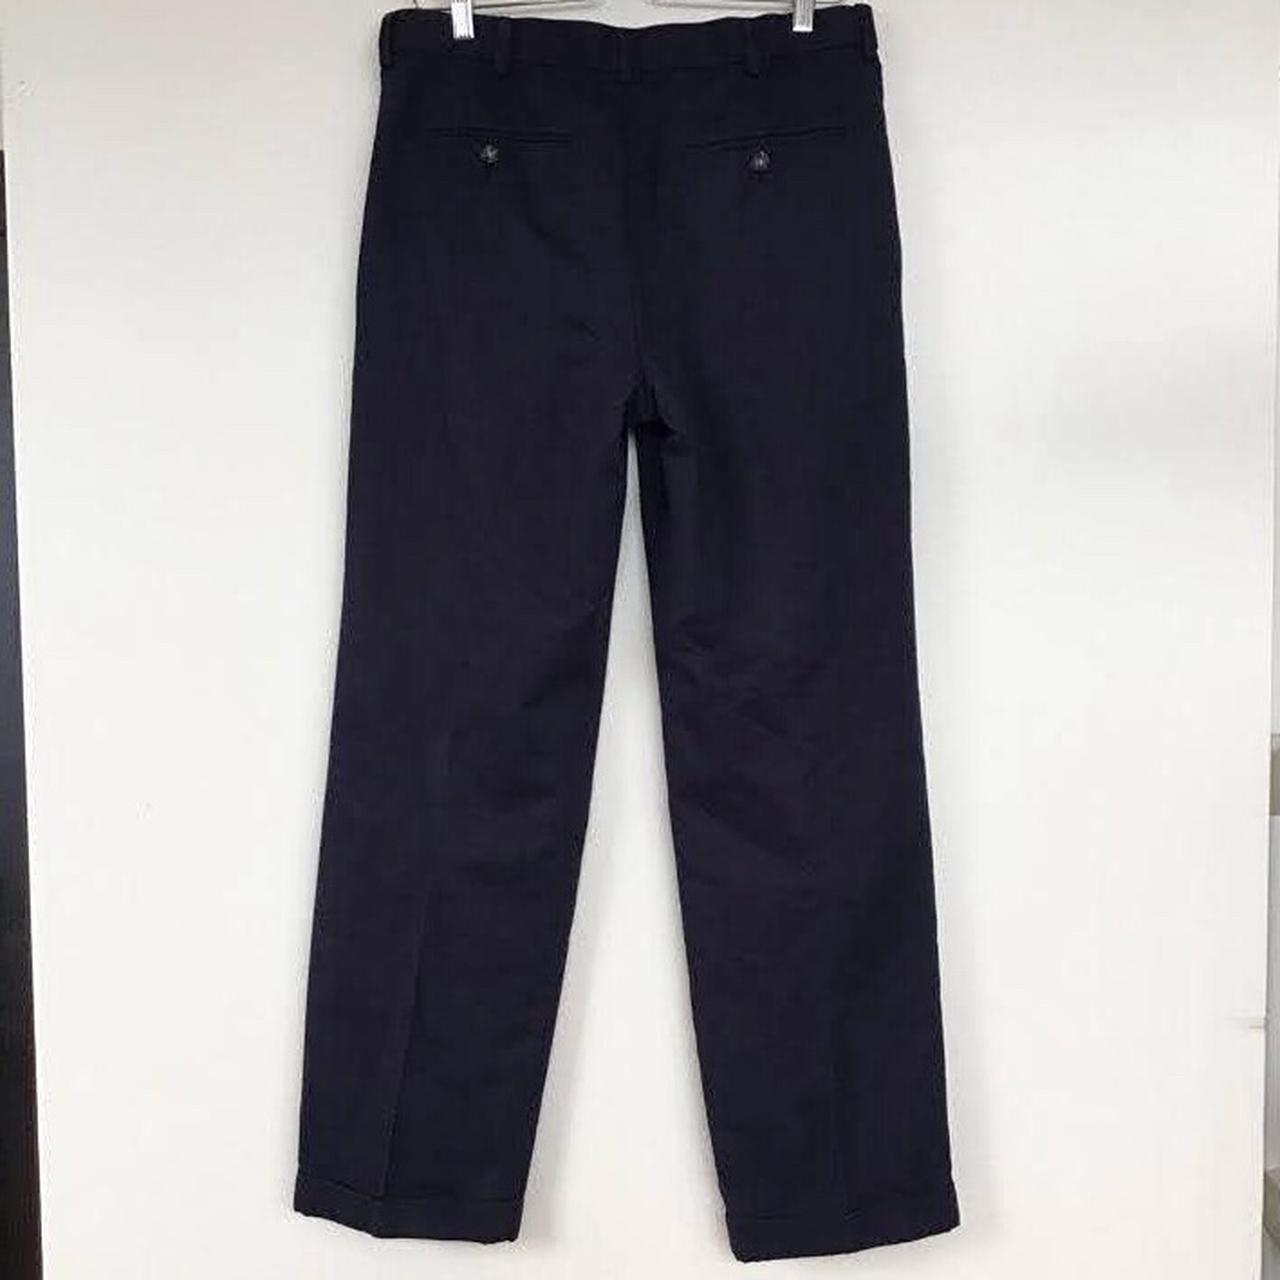 Dockers Men's Navy and Blue Trousers (3)